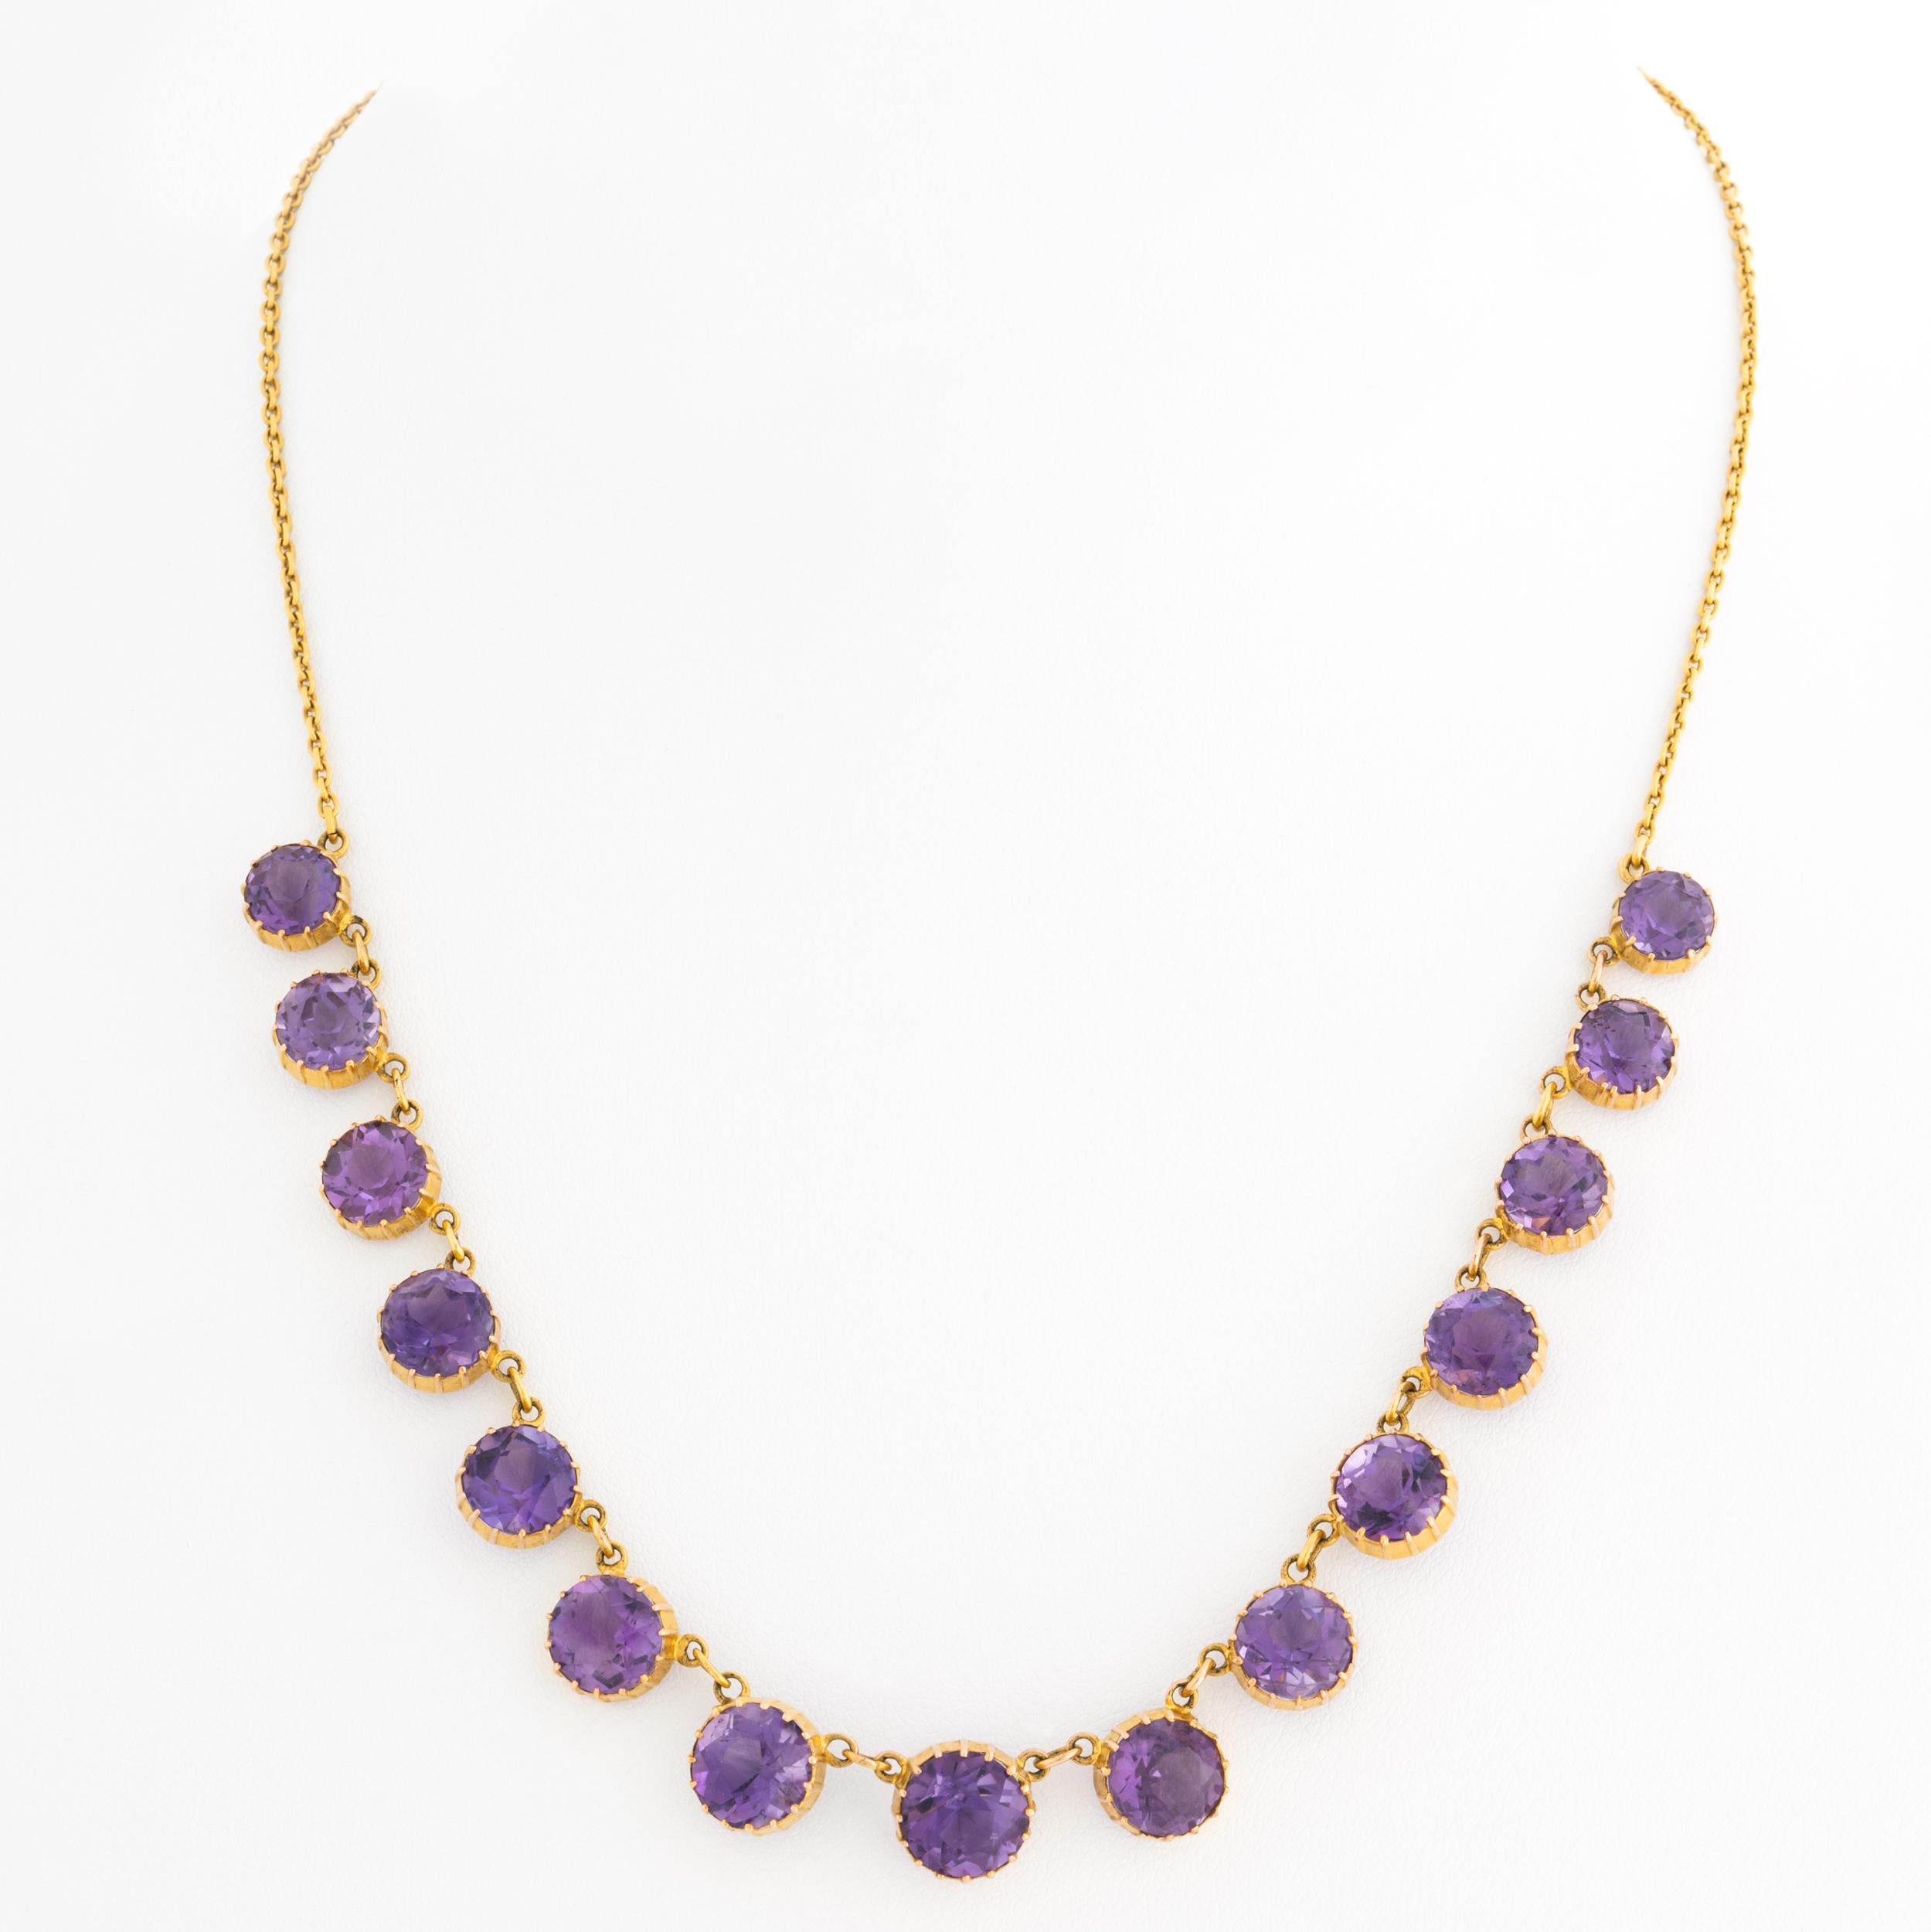 Antique 9 Karat and Natural Amethyst Graduated Rivière Necklace

L 43.7 cm x W 0.98 cm  /  17.2 in. x 0.39 in.
Large Center Stone: W 0.985 cm x 0.985 cm / 0.39 in. x 0.39 in.
Smallest Stone: W 0.743 cm x 0.743 cm / 0.293 in. x 0.293 in.
13.1 grams
